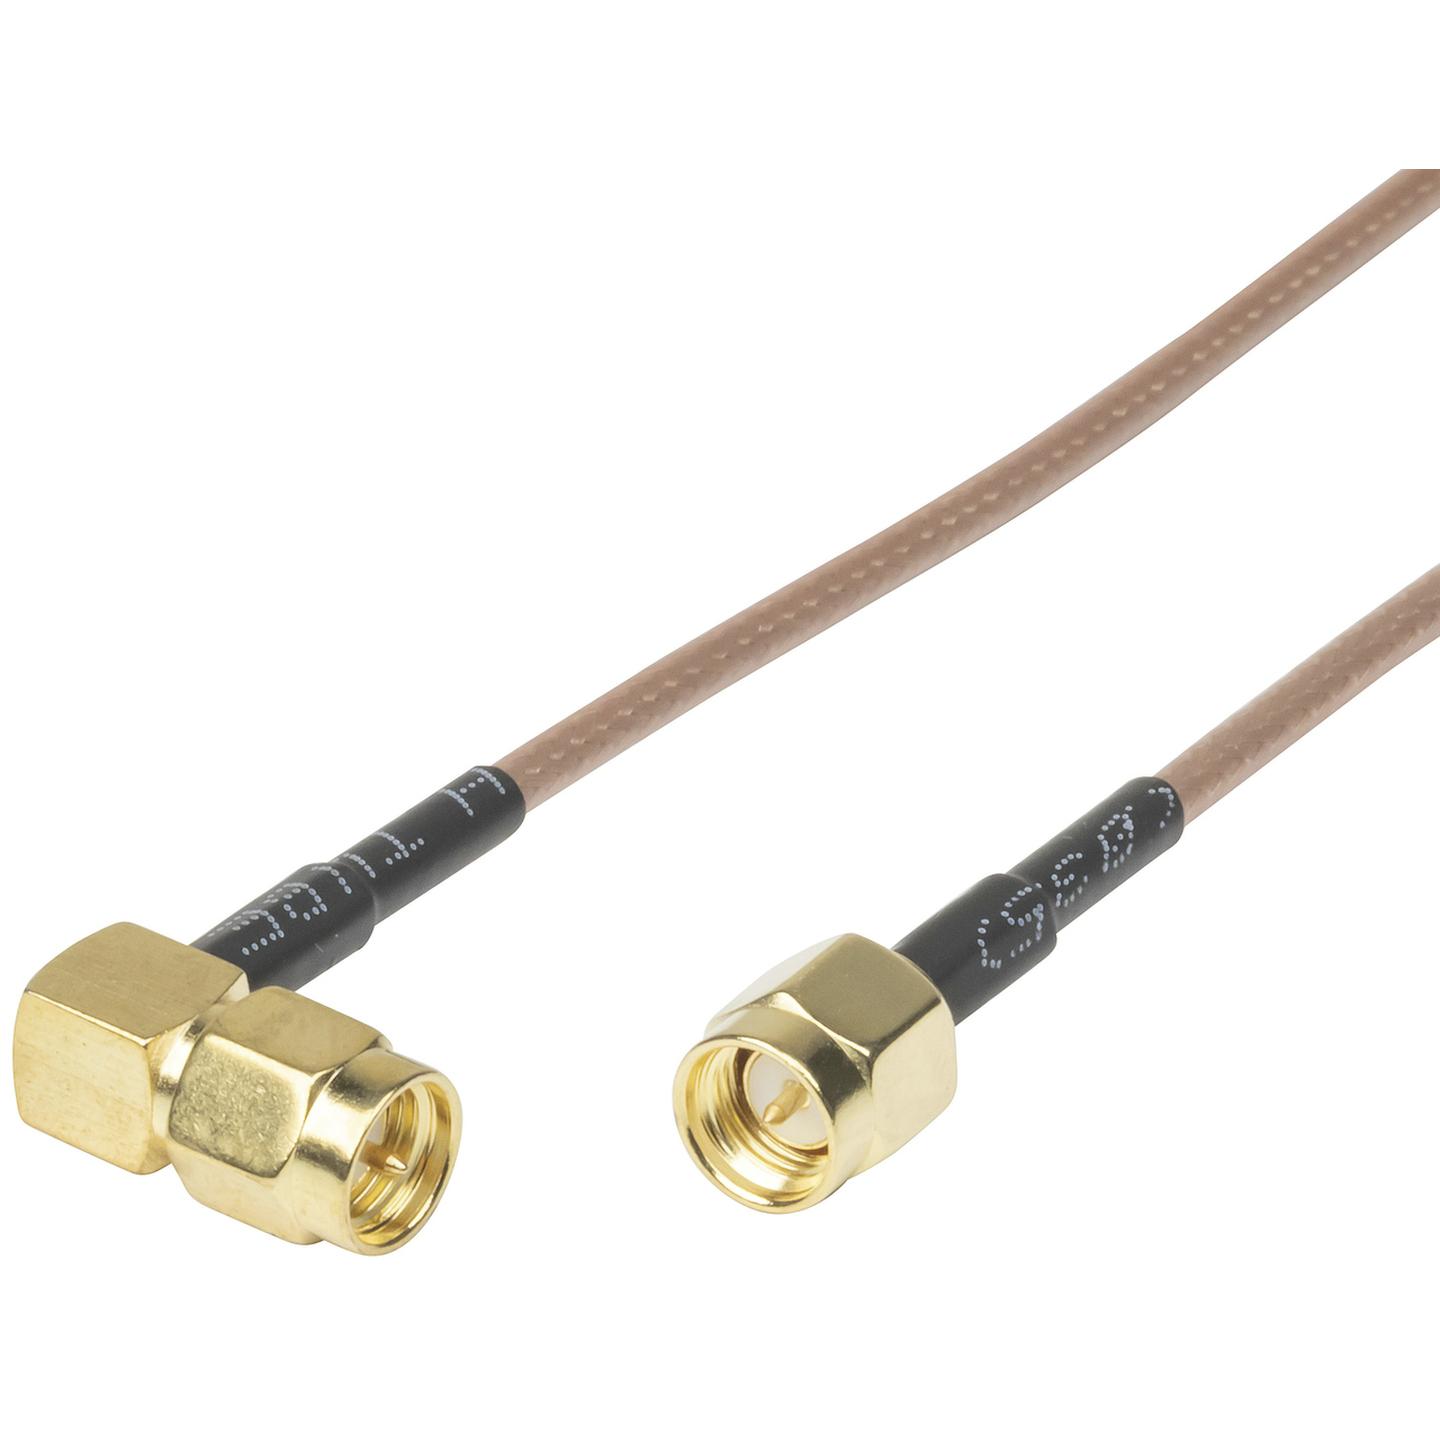 1m SMA Coaxial Cable